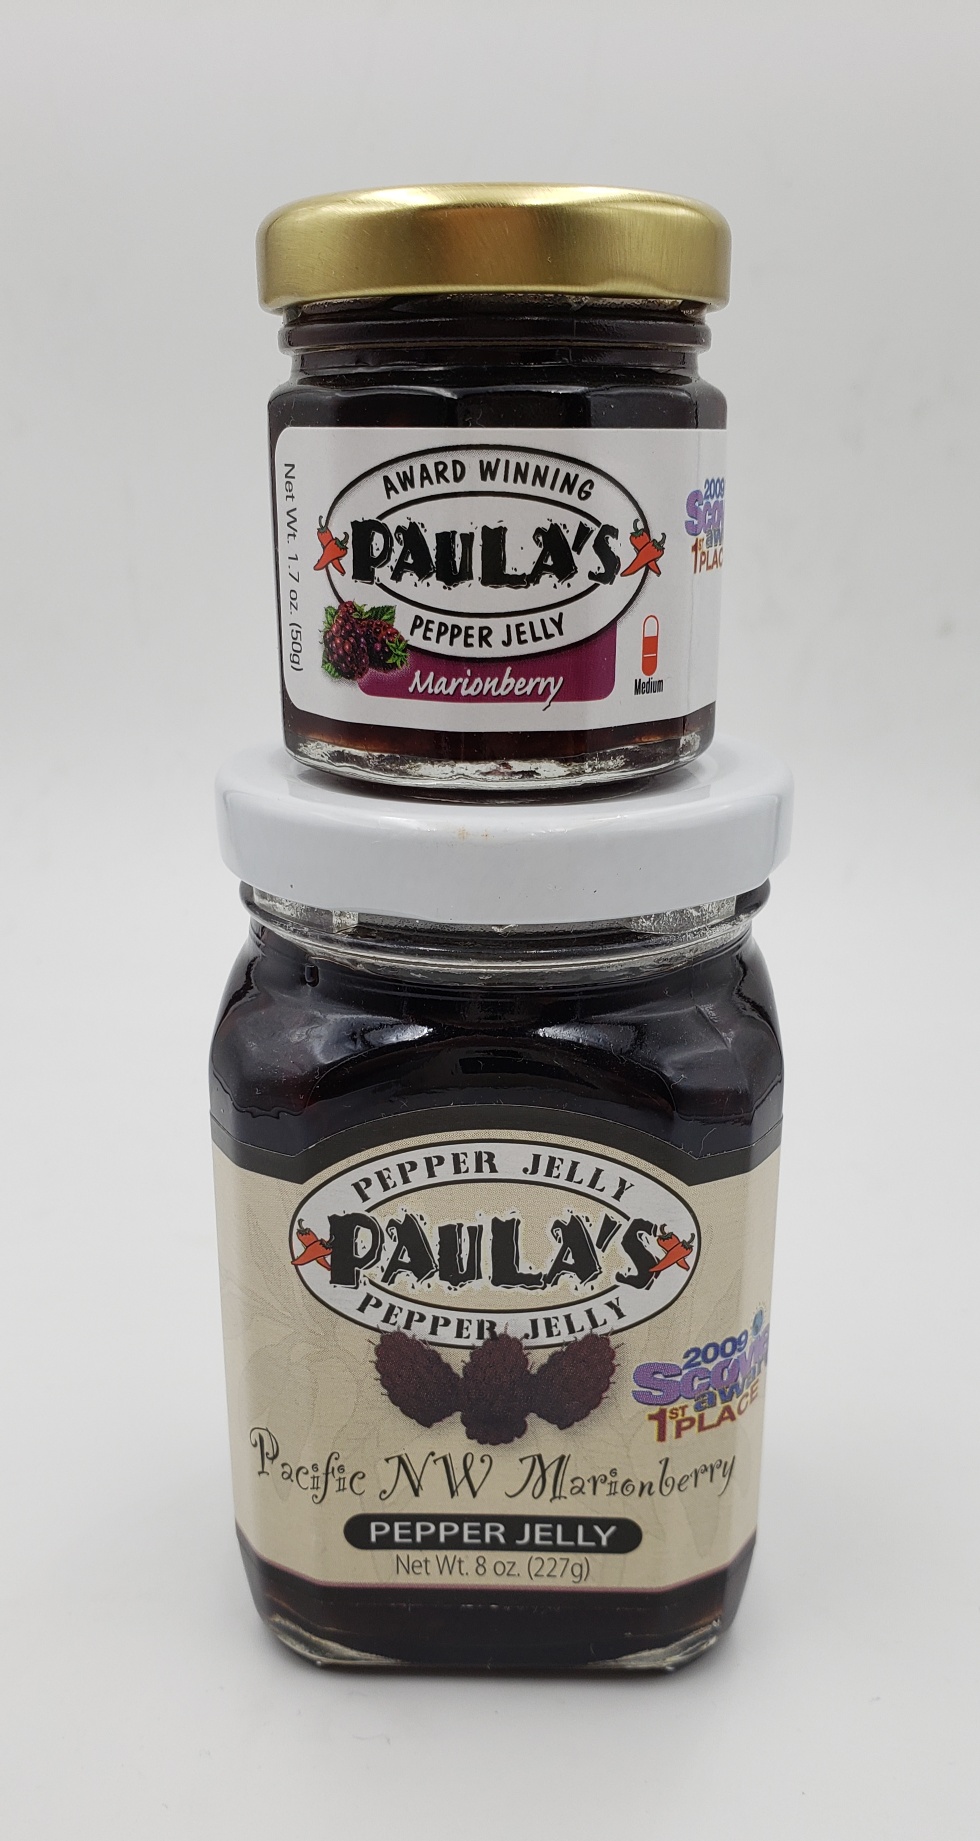 The 1.7 oz. marionberry pepper jelly jar on top of the 8 oz. Paula’s Pepper Jelly jar both full of marionberry pepper jelly.